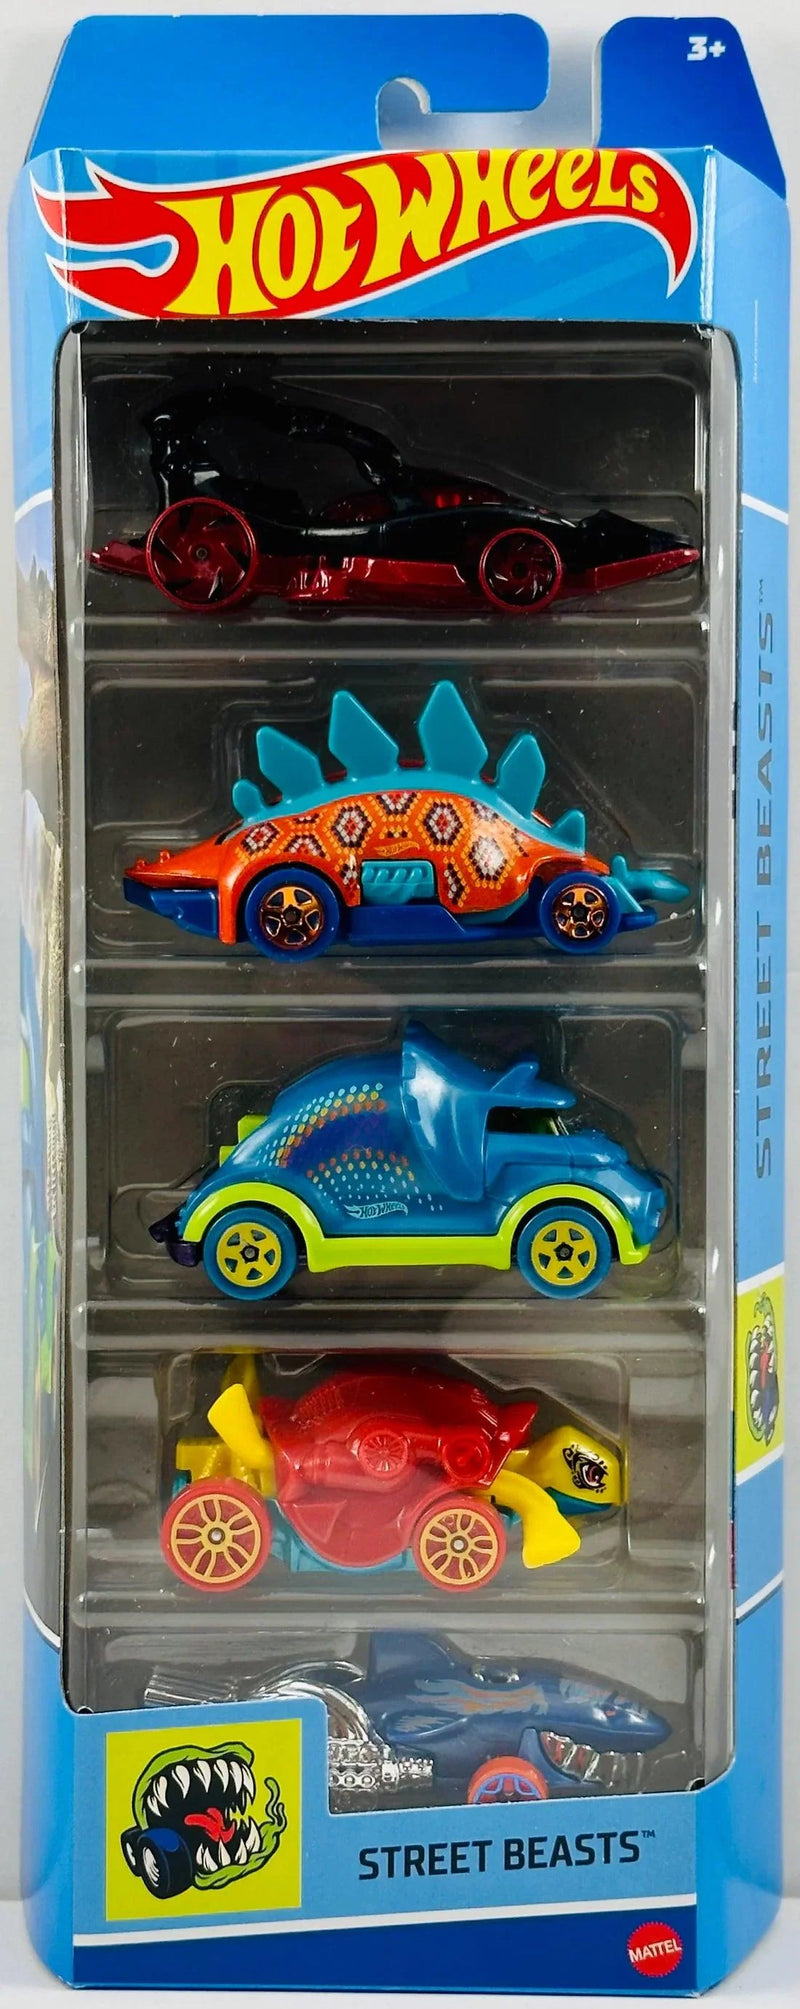 Hotwheels Street Beasts Official Set of 5 Vehicles Exclusive Collection - No Cod Allowed On this Product - Prepaid Orders Only.